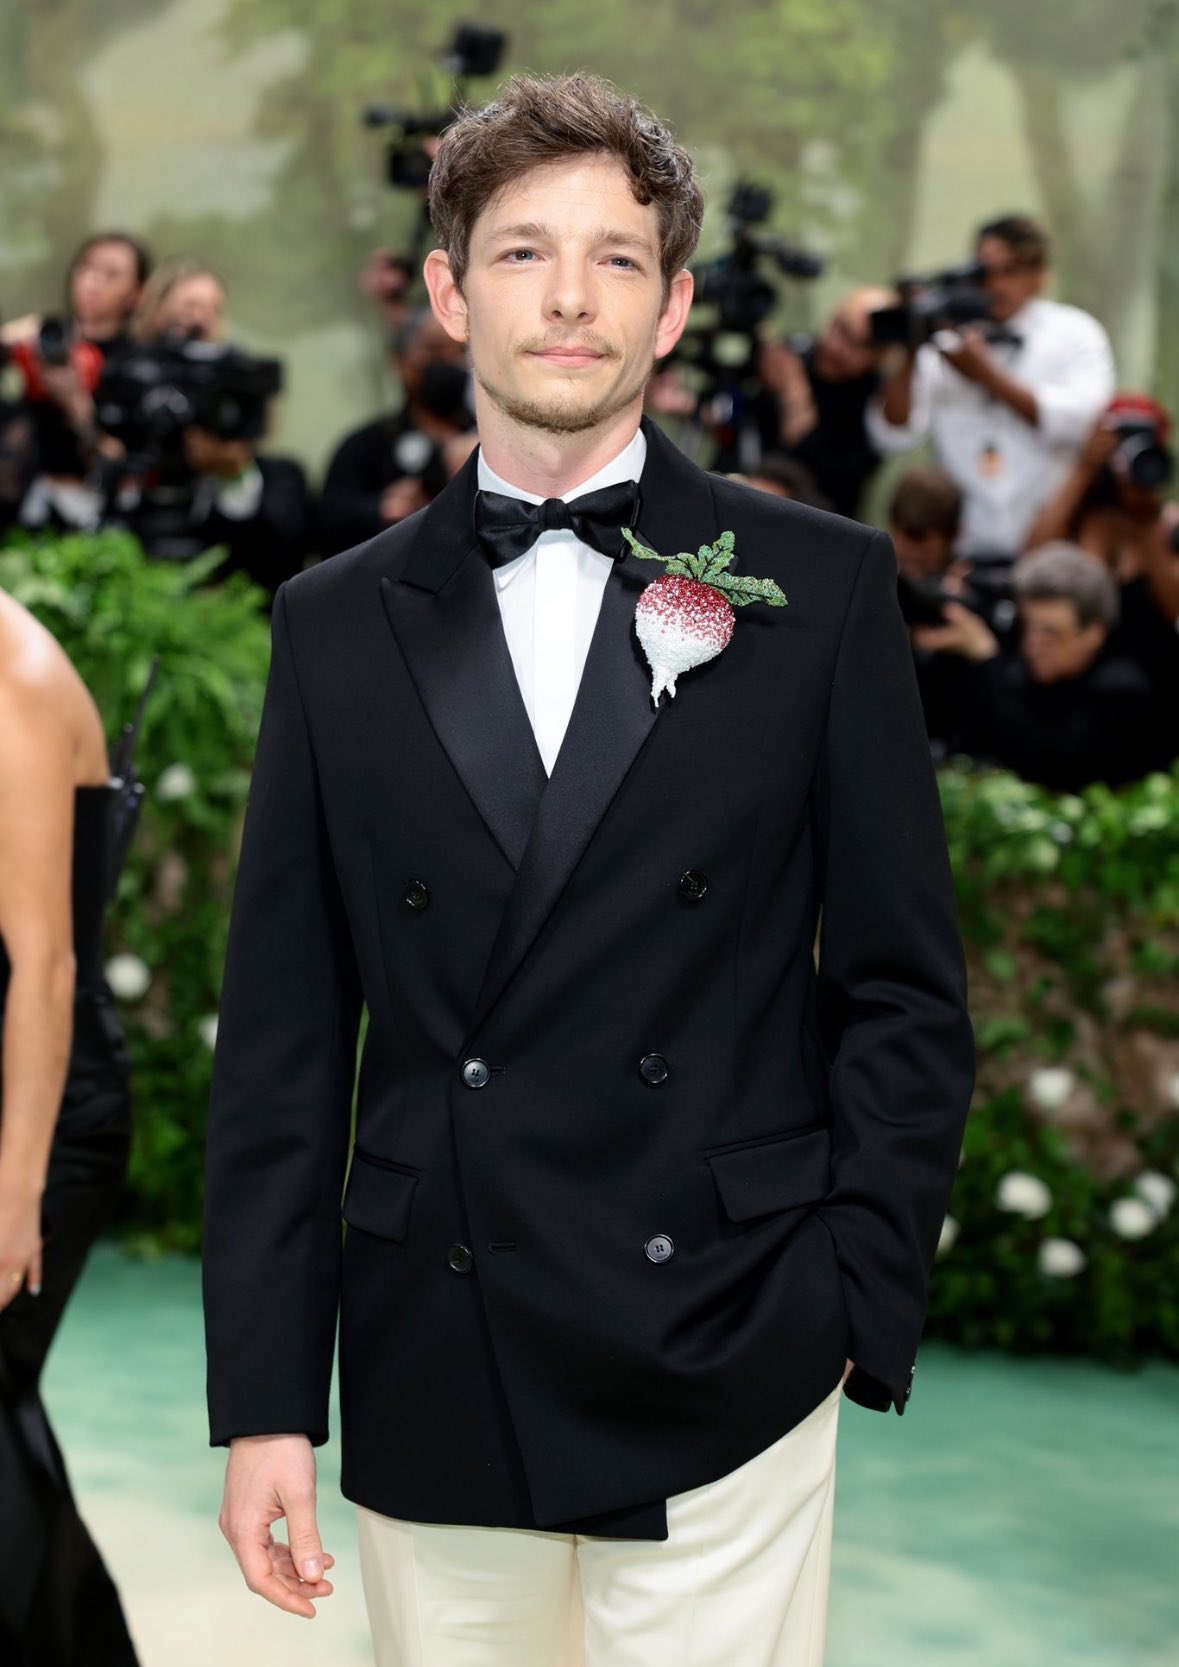 Mike Faist’s Met Gala look features an interesting touch to his attire–an embellished radish brooch